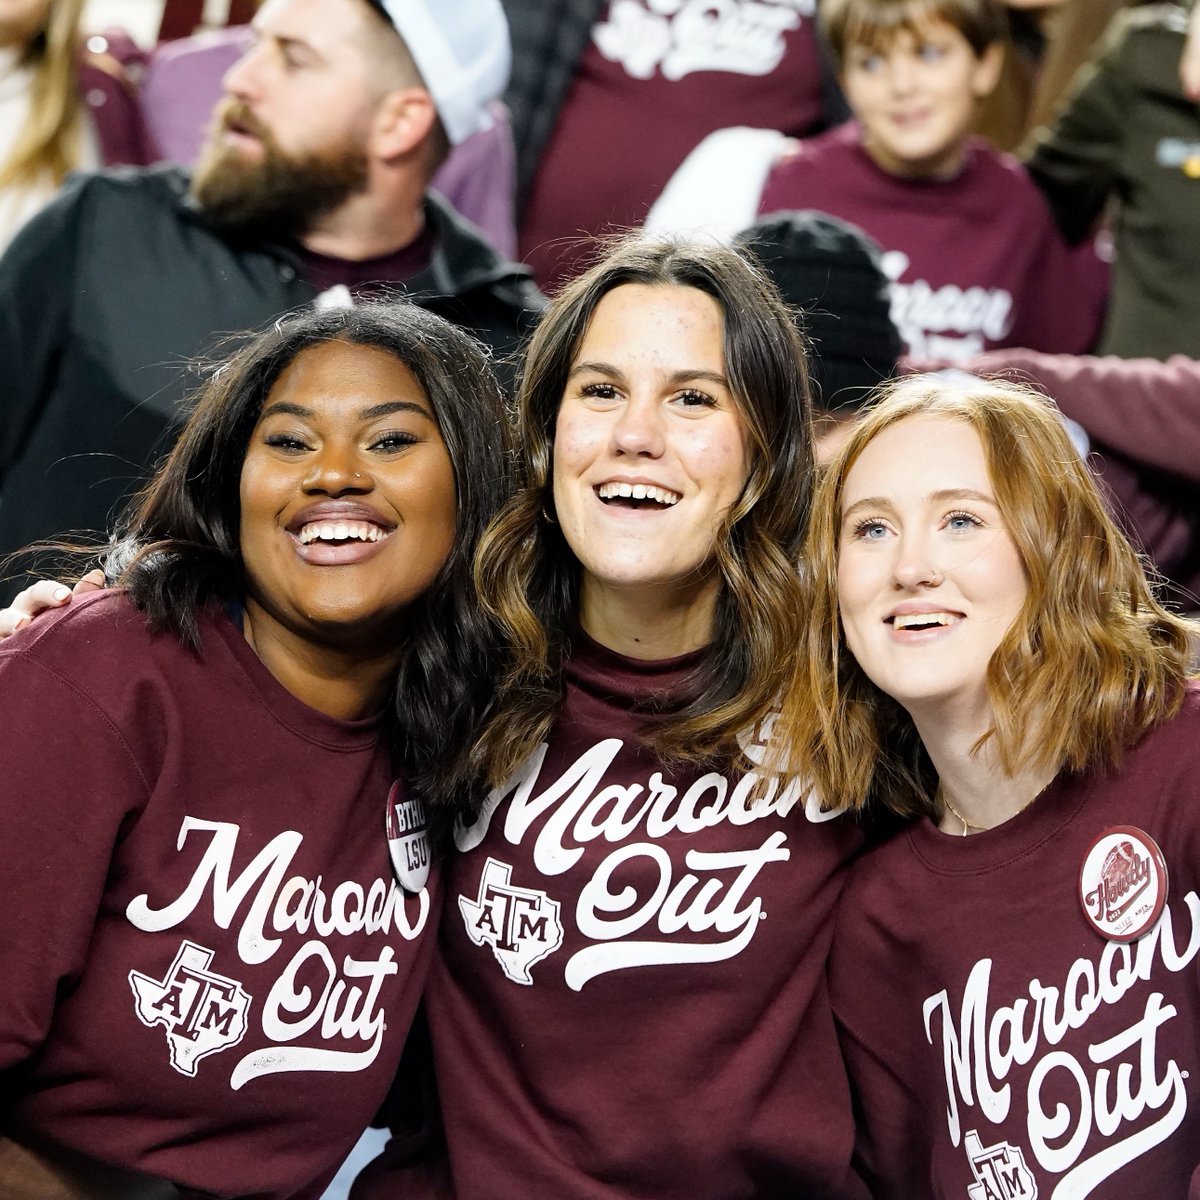 Howdy Ags! Today is National College Colors Day! Show your @tamu pride by wearing maroon today and getting ready for some Fightin' Texas Aggie football tomorrow! #tamu #collegecolors